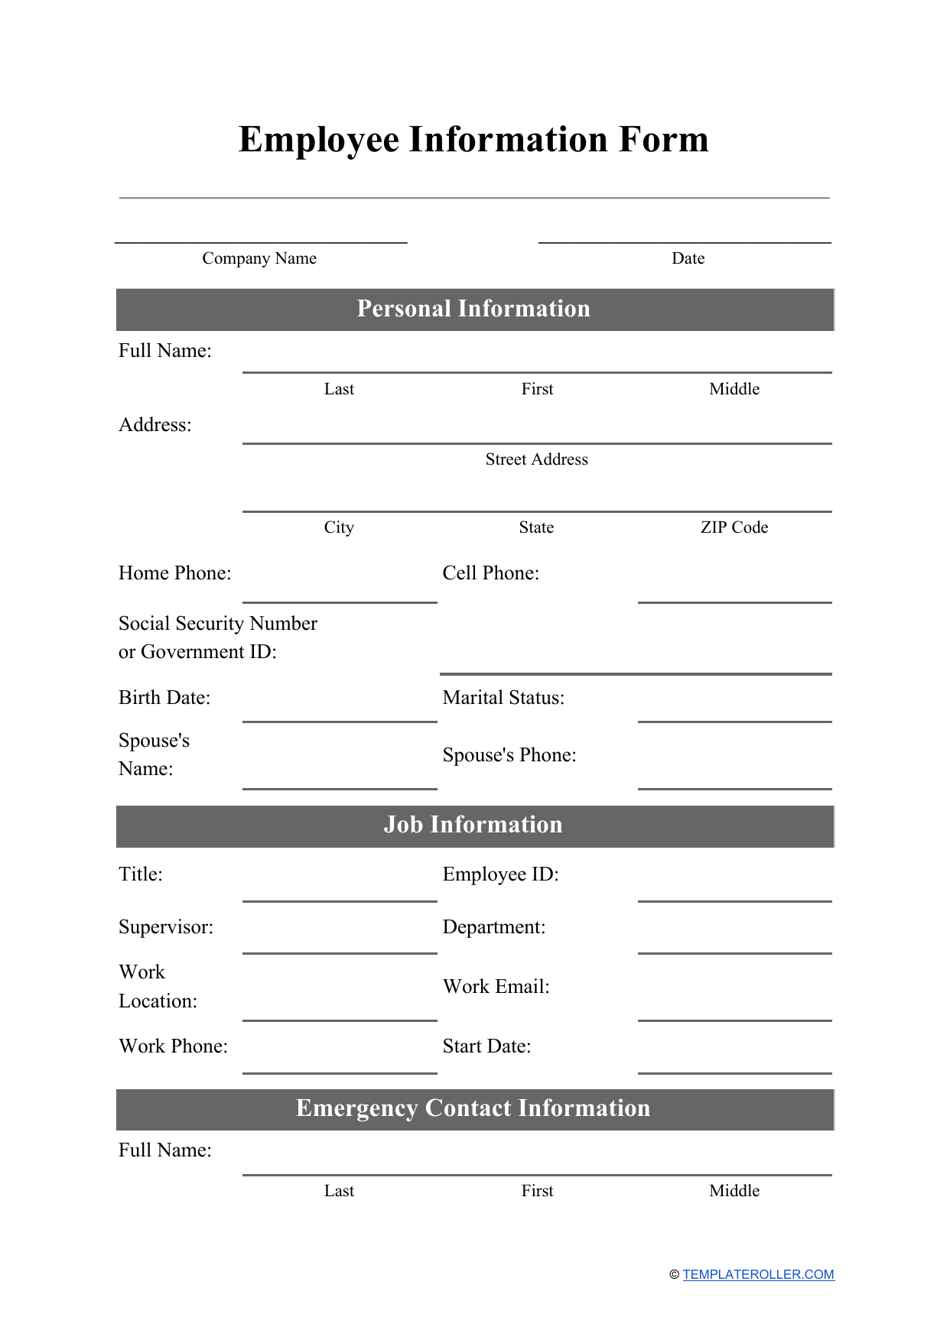 Employee Information Form, Page 1